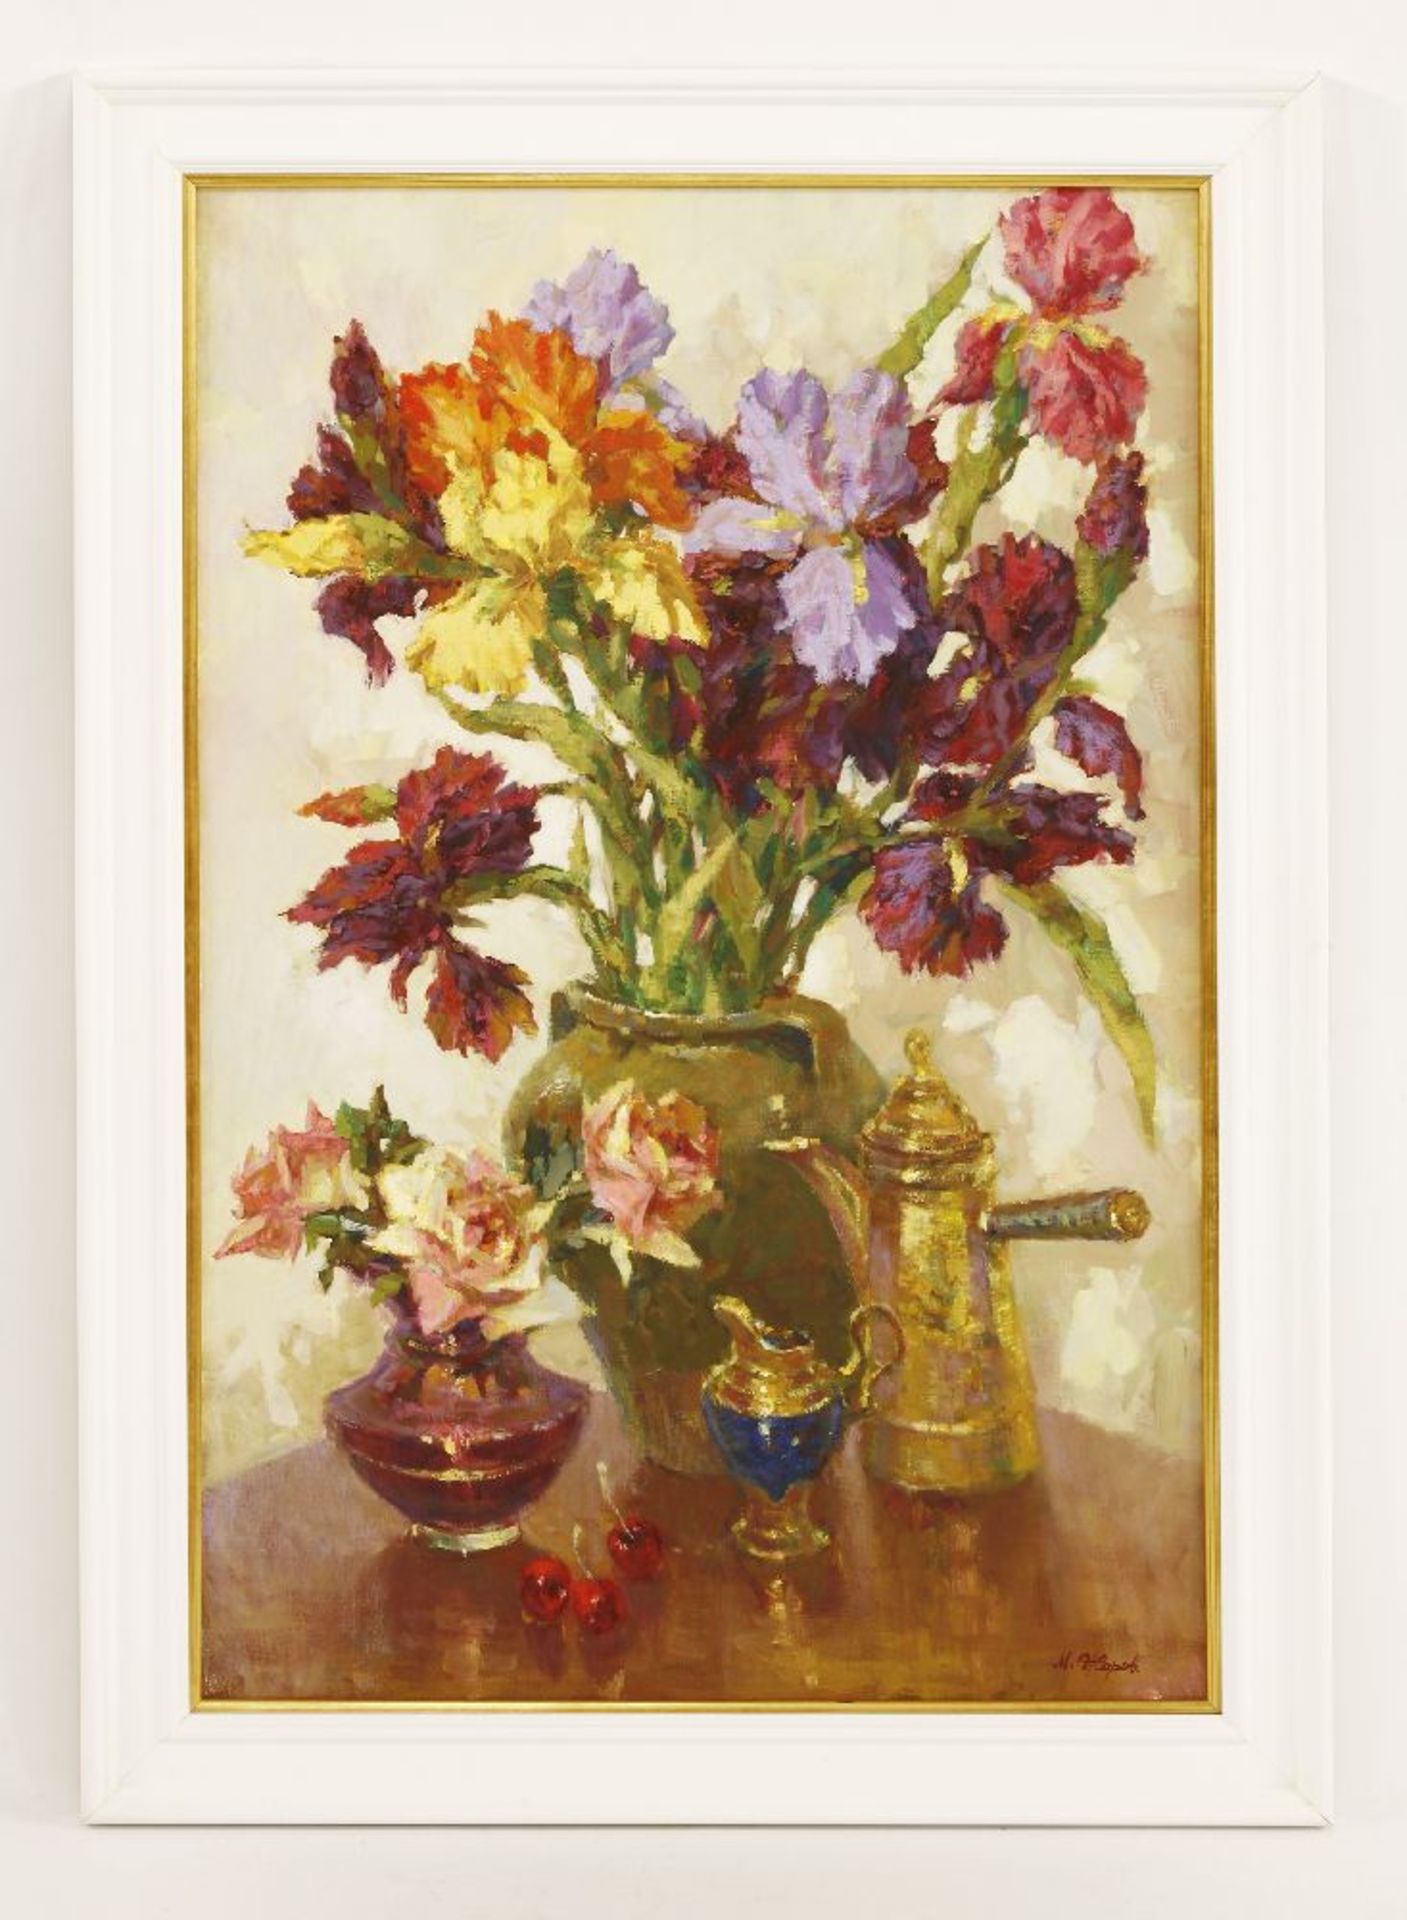 Mikhail Zharov (Russian, b.1974)A STILL LIFE OF A VASE OF IRISES, A VASE OF ROSES, A COFFEE POT - Image 2 of 4